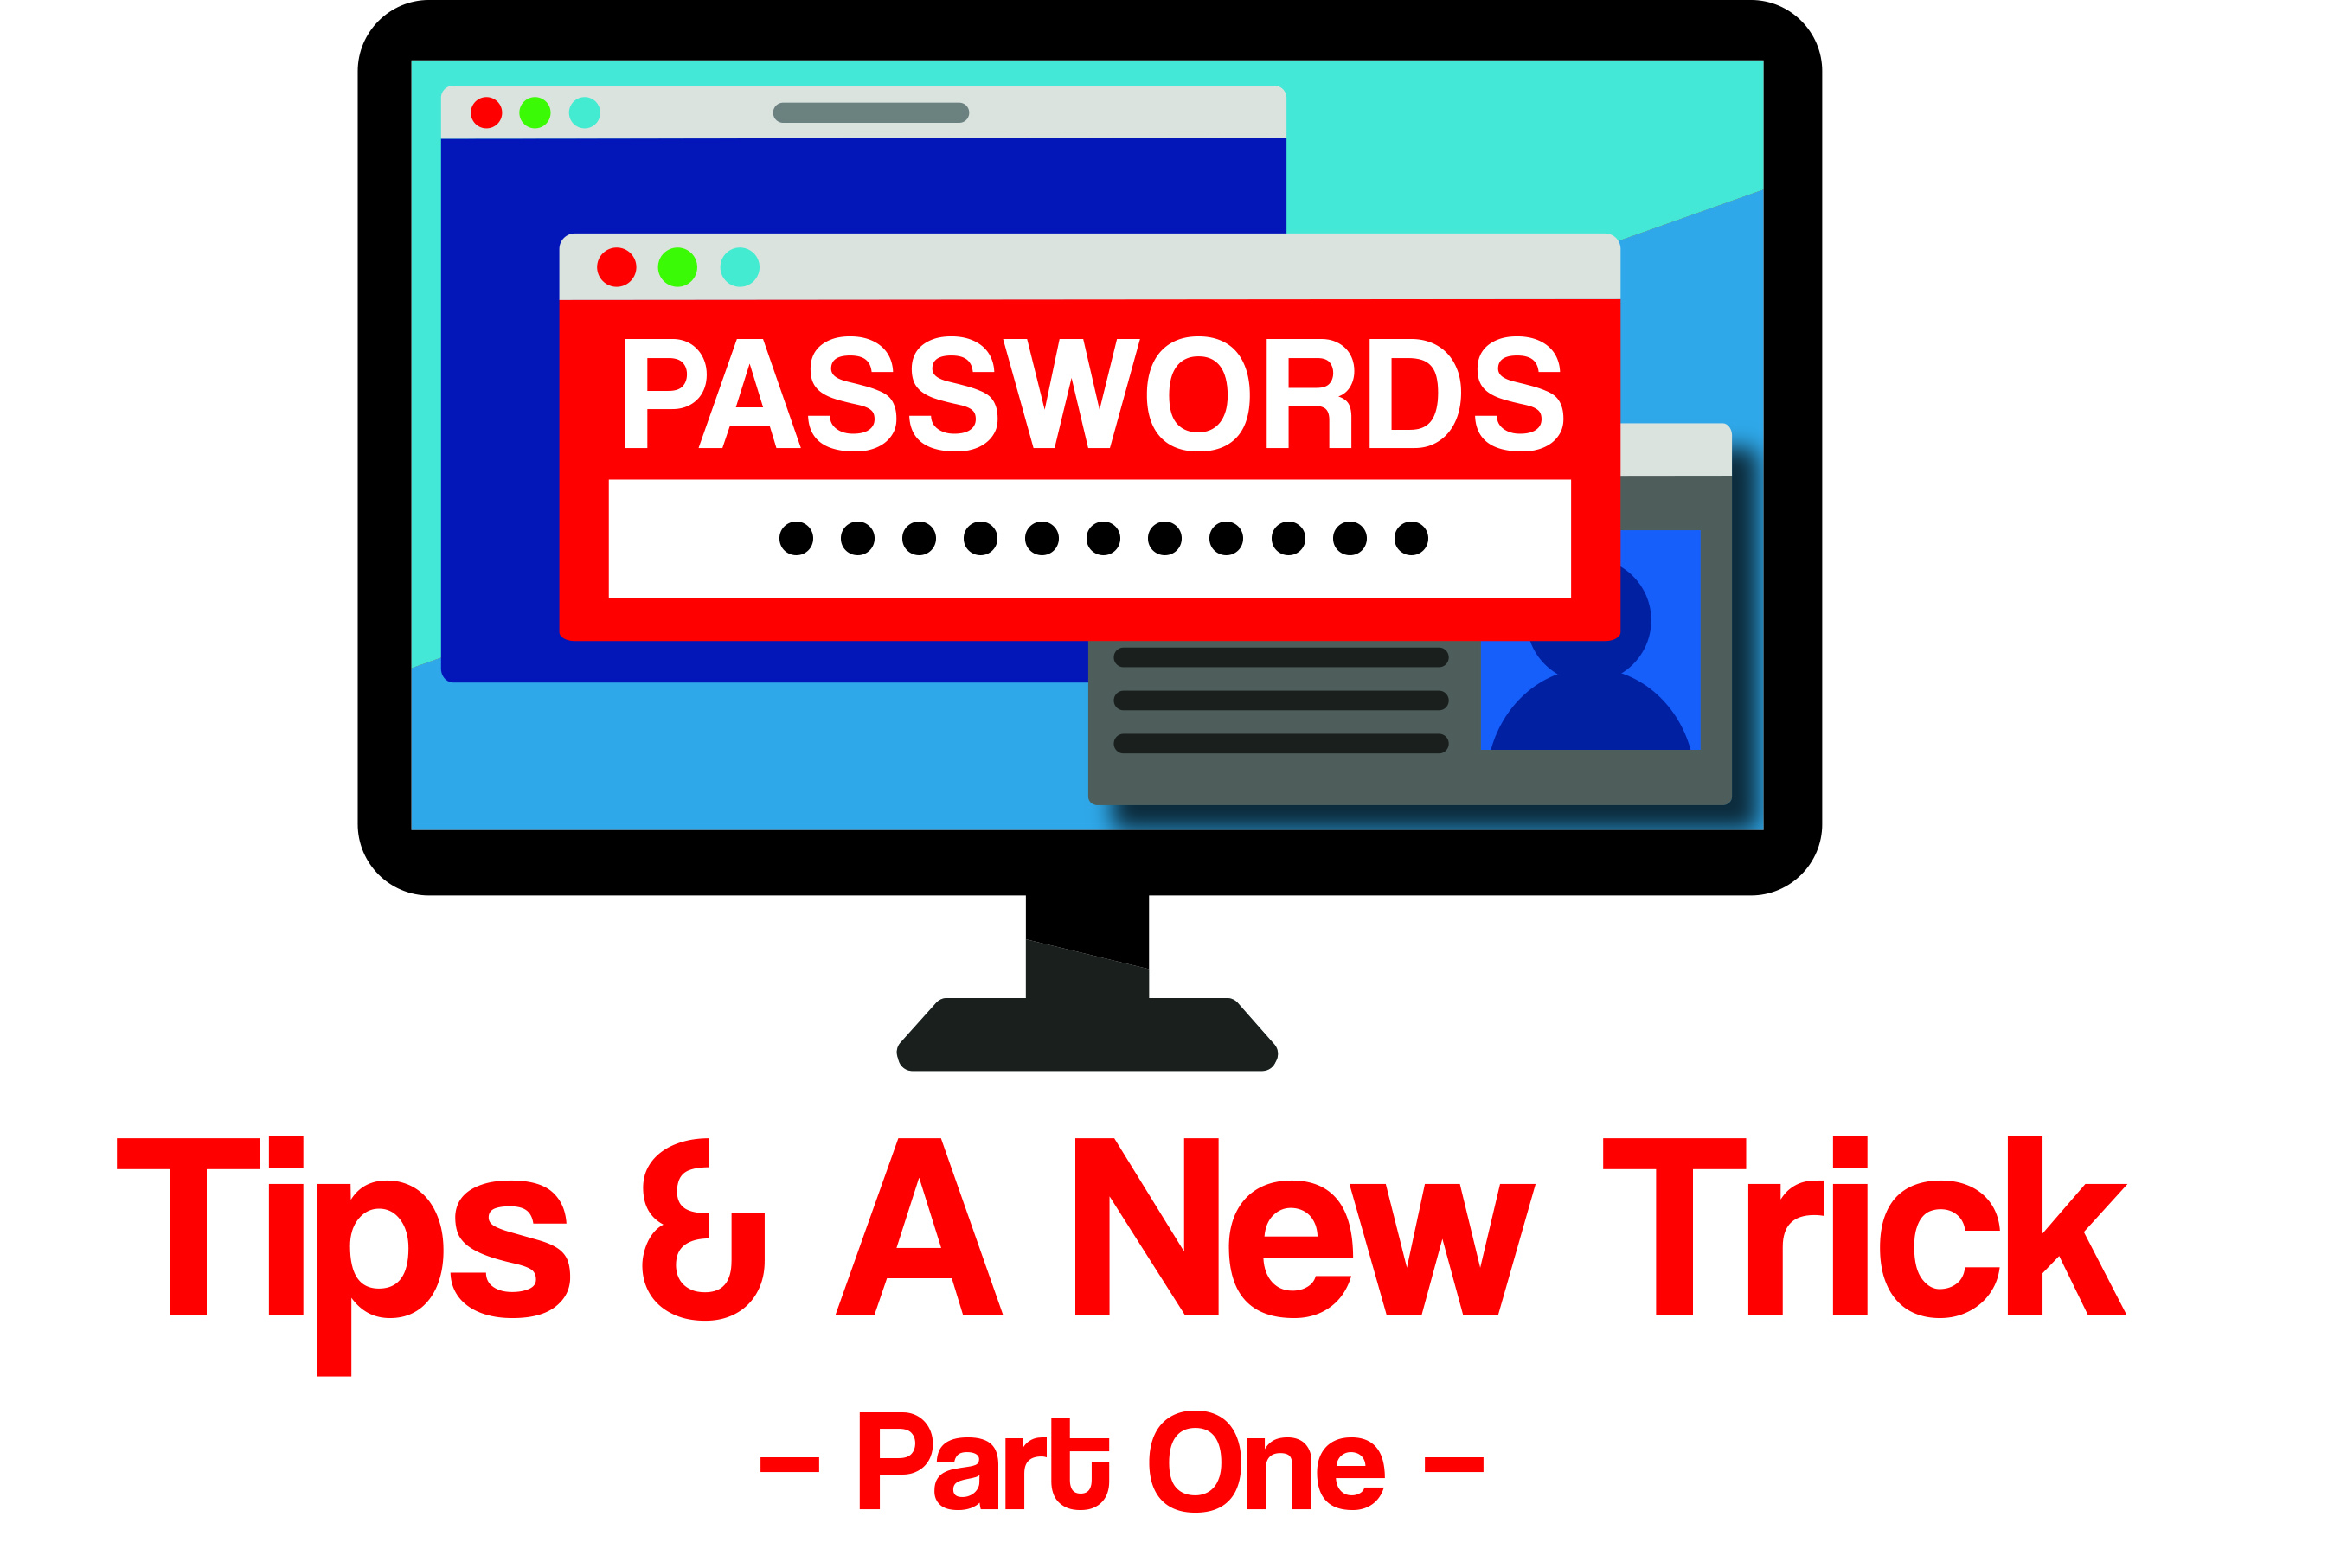 Passwords. Tips and A New Trick